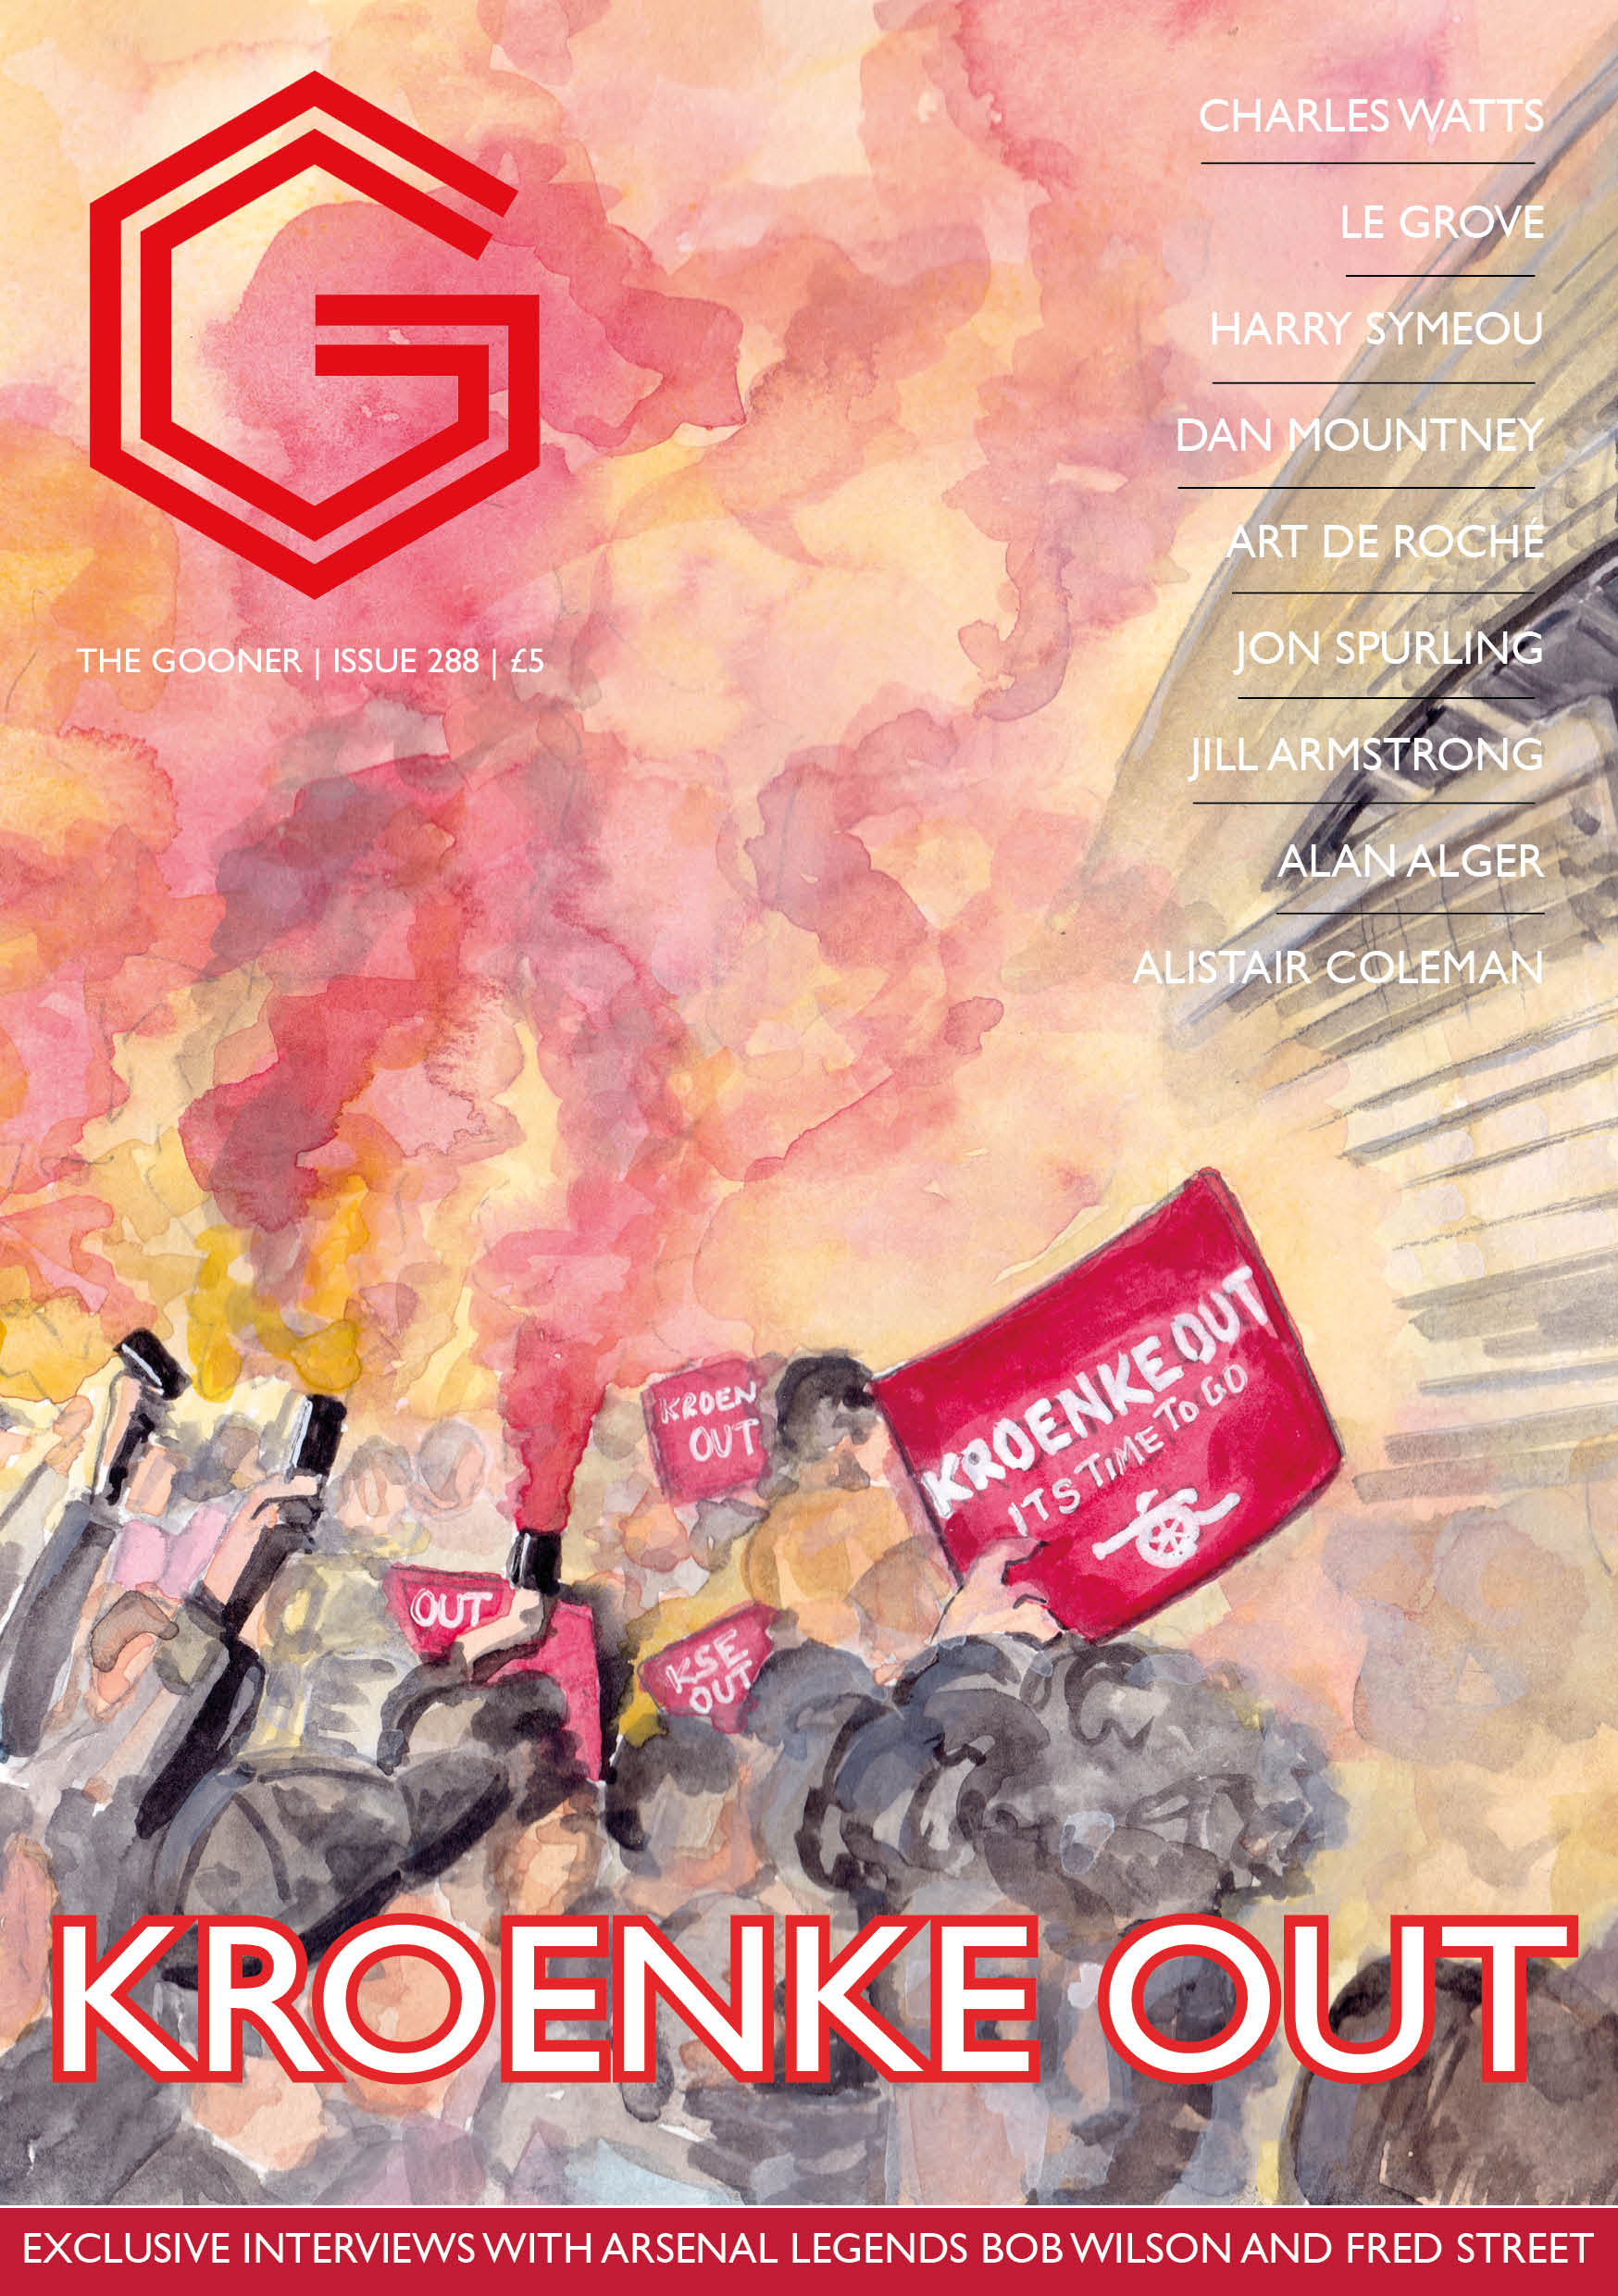 Gooner Issue 288 Pre-Order (UK - Shipping Included)